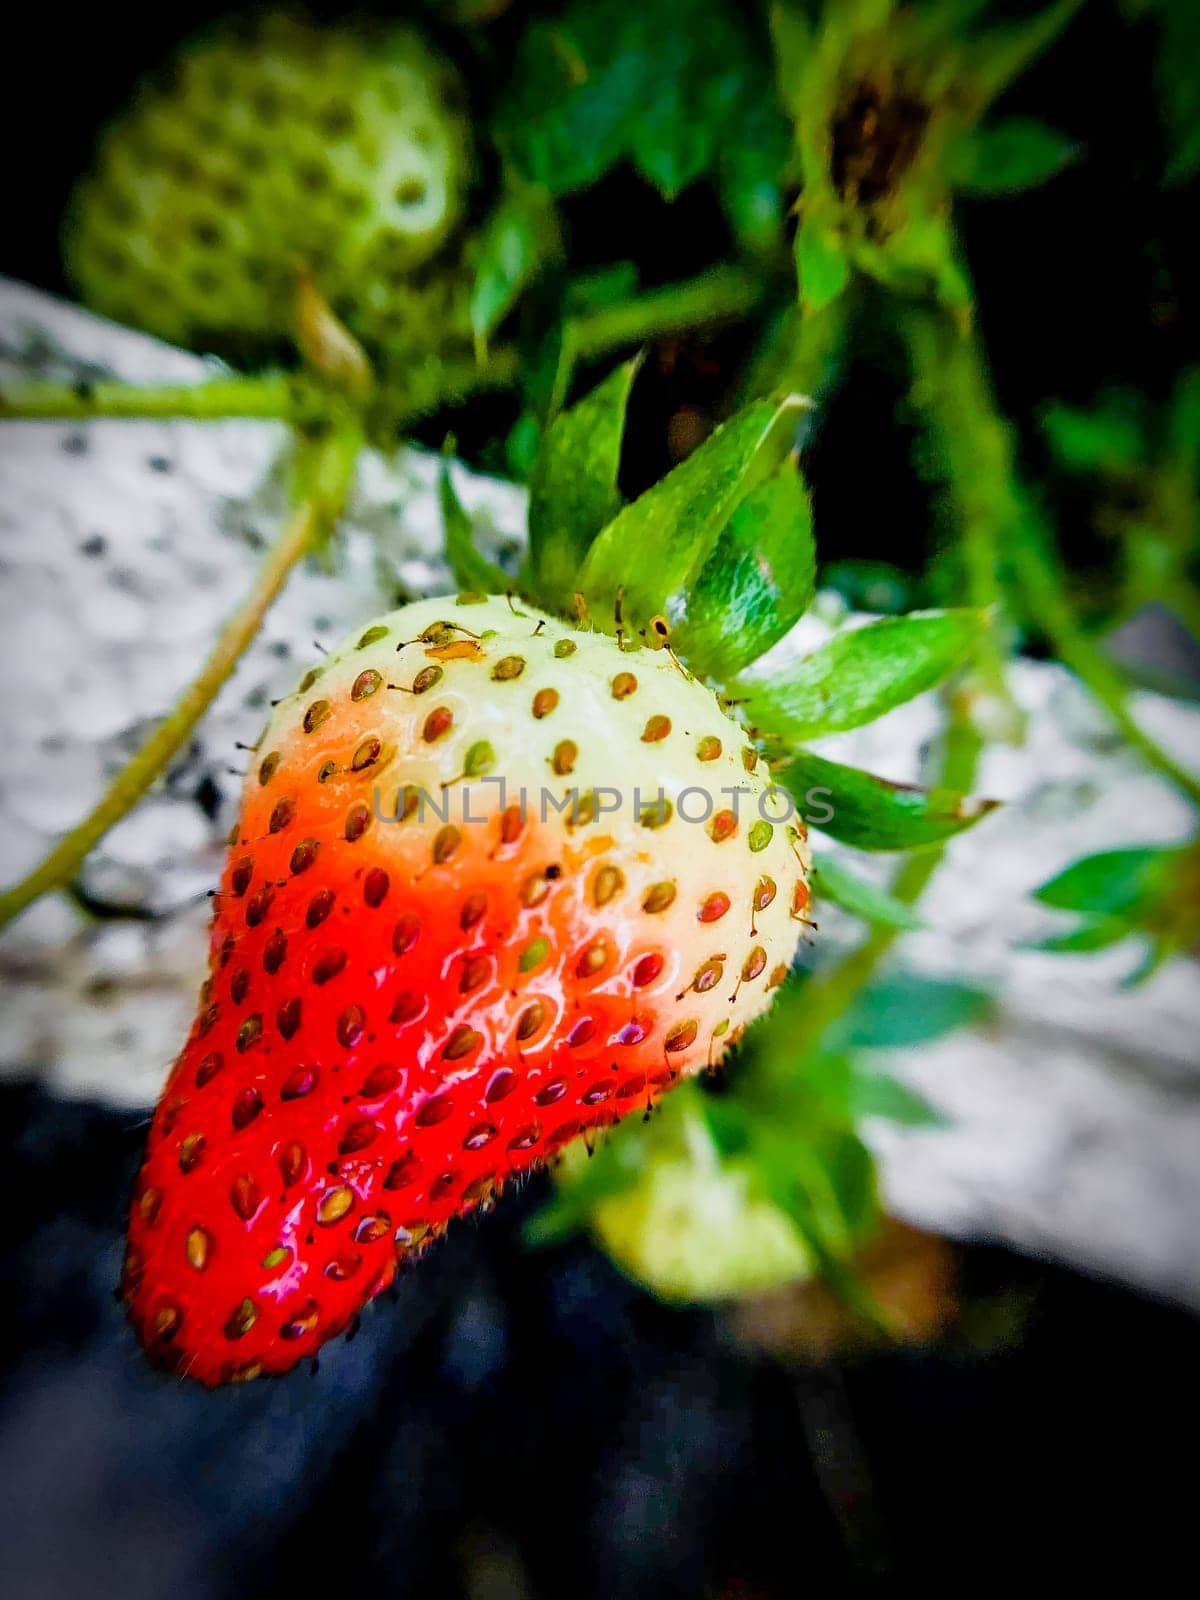 A close-up photo of a strawberry plant with a single ripe strawberry. The strawberry is red with green leaves and is hanging from the plant. The background is blurred and consists of other unripe strawberries and leaves. The image is taken from a low angle, looking up at the strawberry. The image has a high contrast and the colors are vibrant.